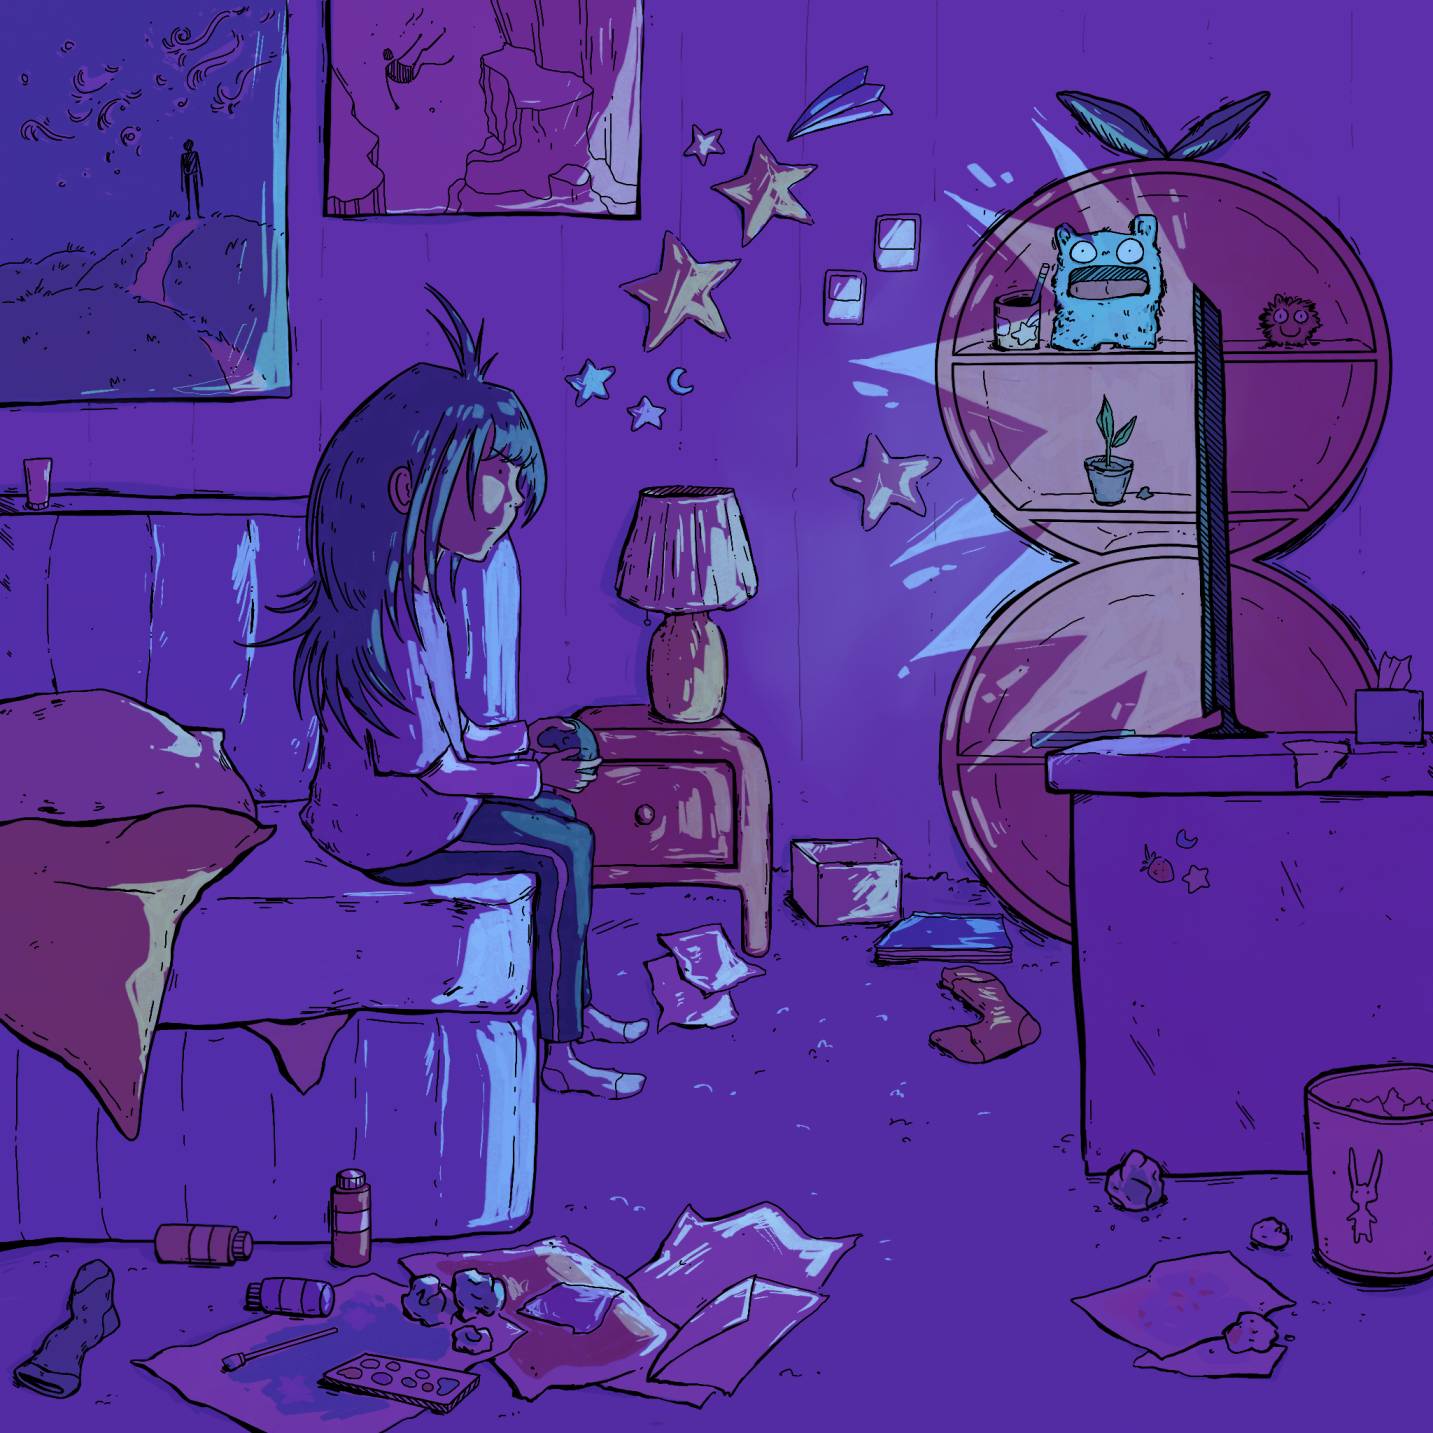 A moody illustration of person with long disheveled hair in a dark purple-lit bed room playing a game on a console, things sprawled on the floor and star-themed decor on the wall.